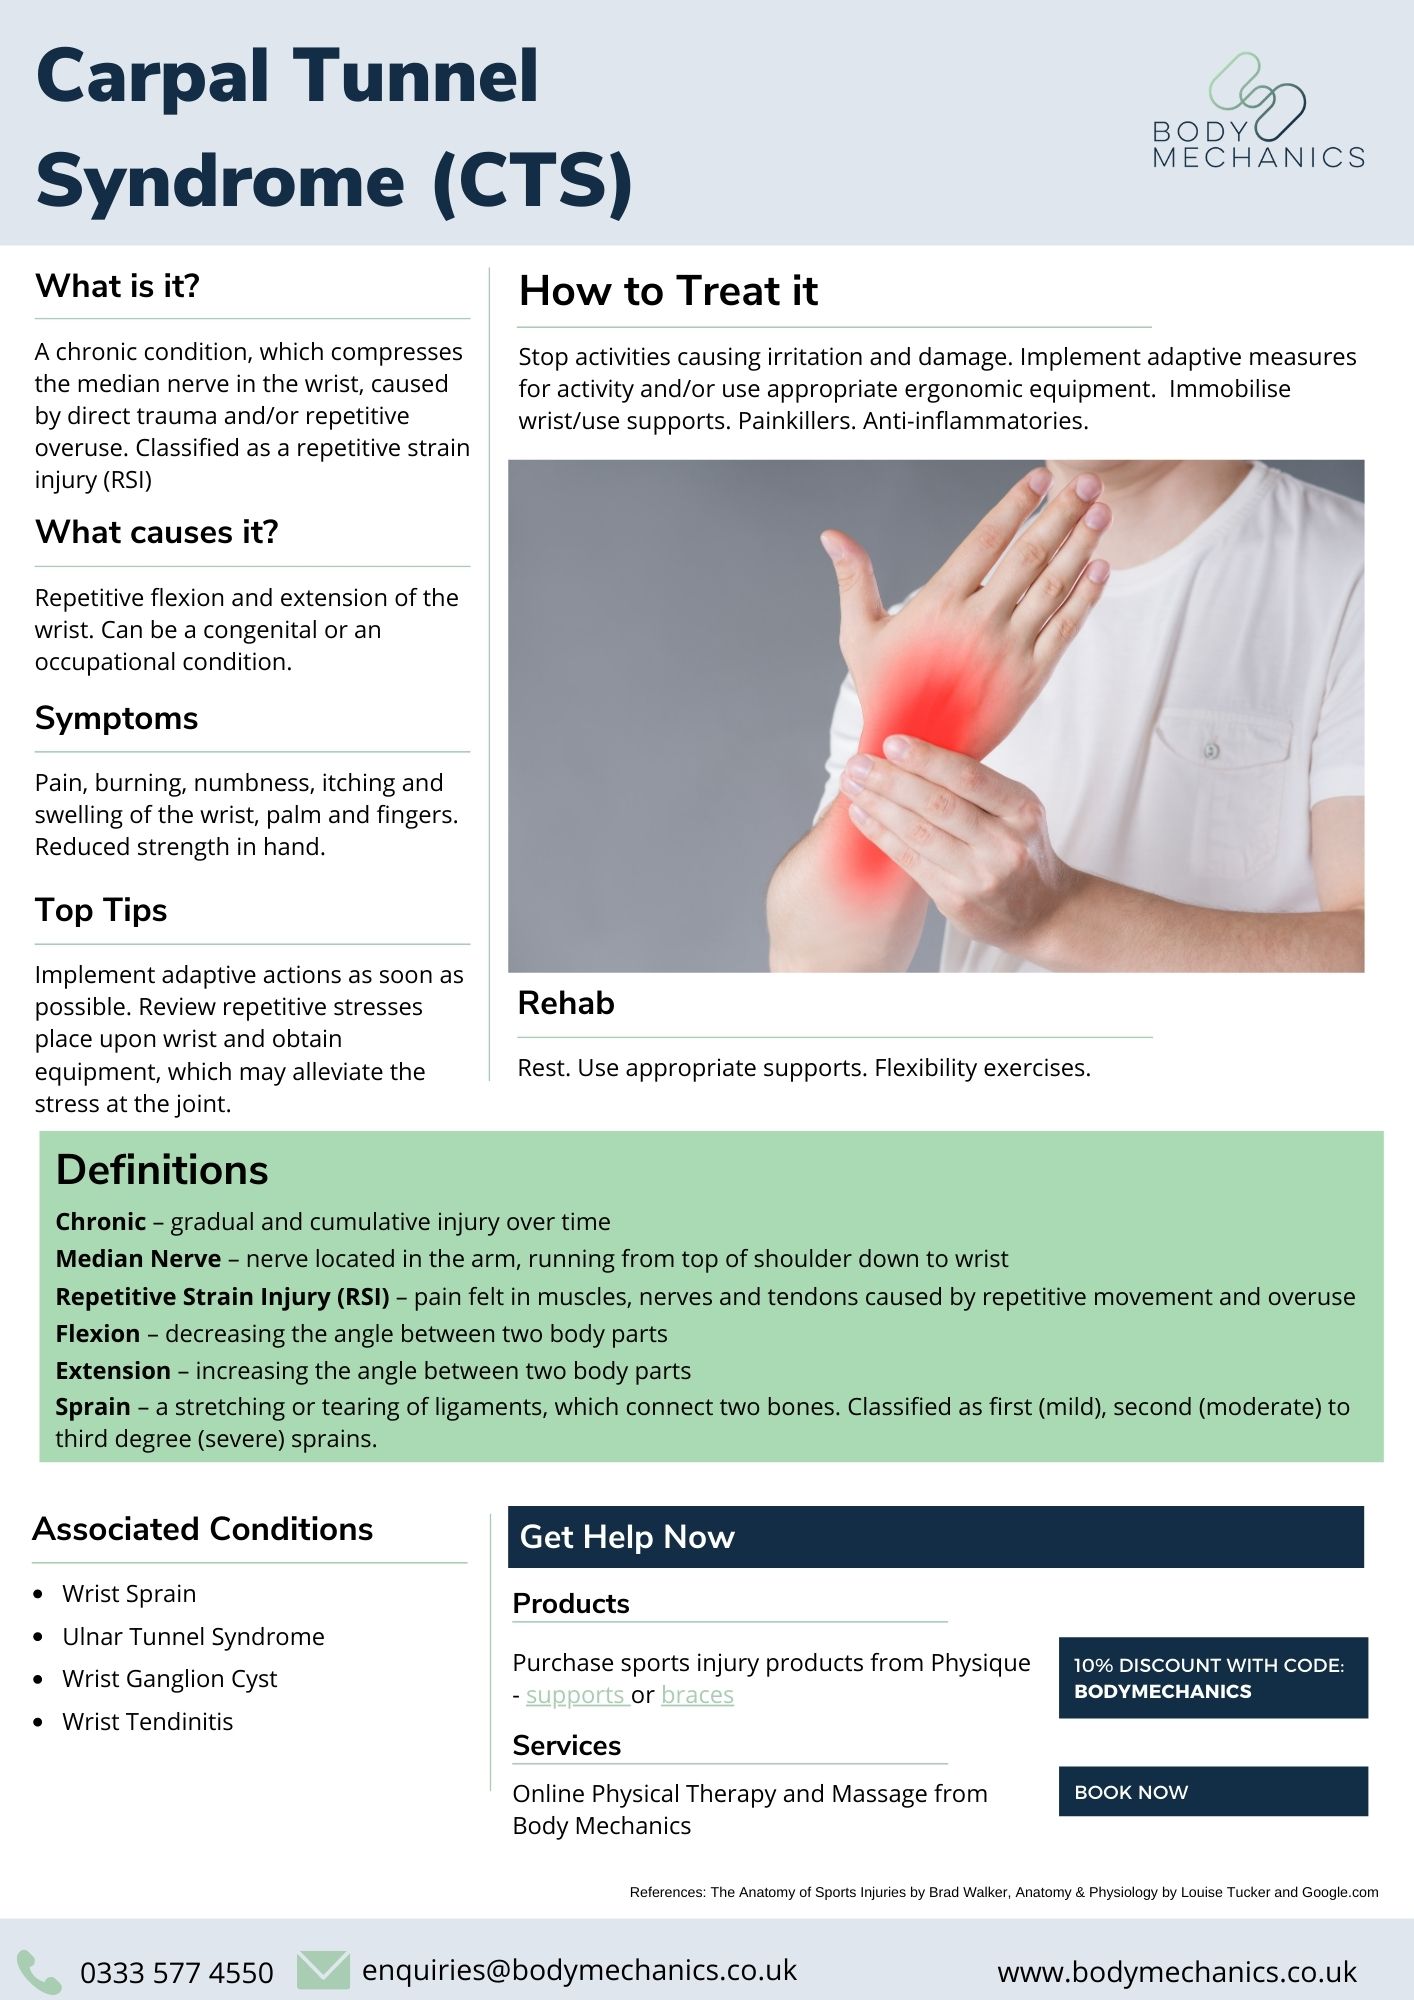 Carpal Tunnel Syndrome (CTS) Infosheet